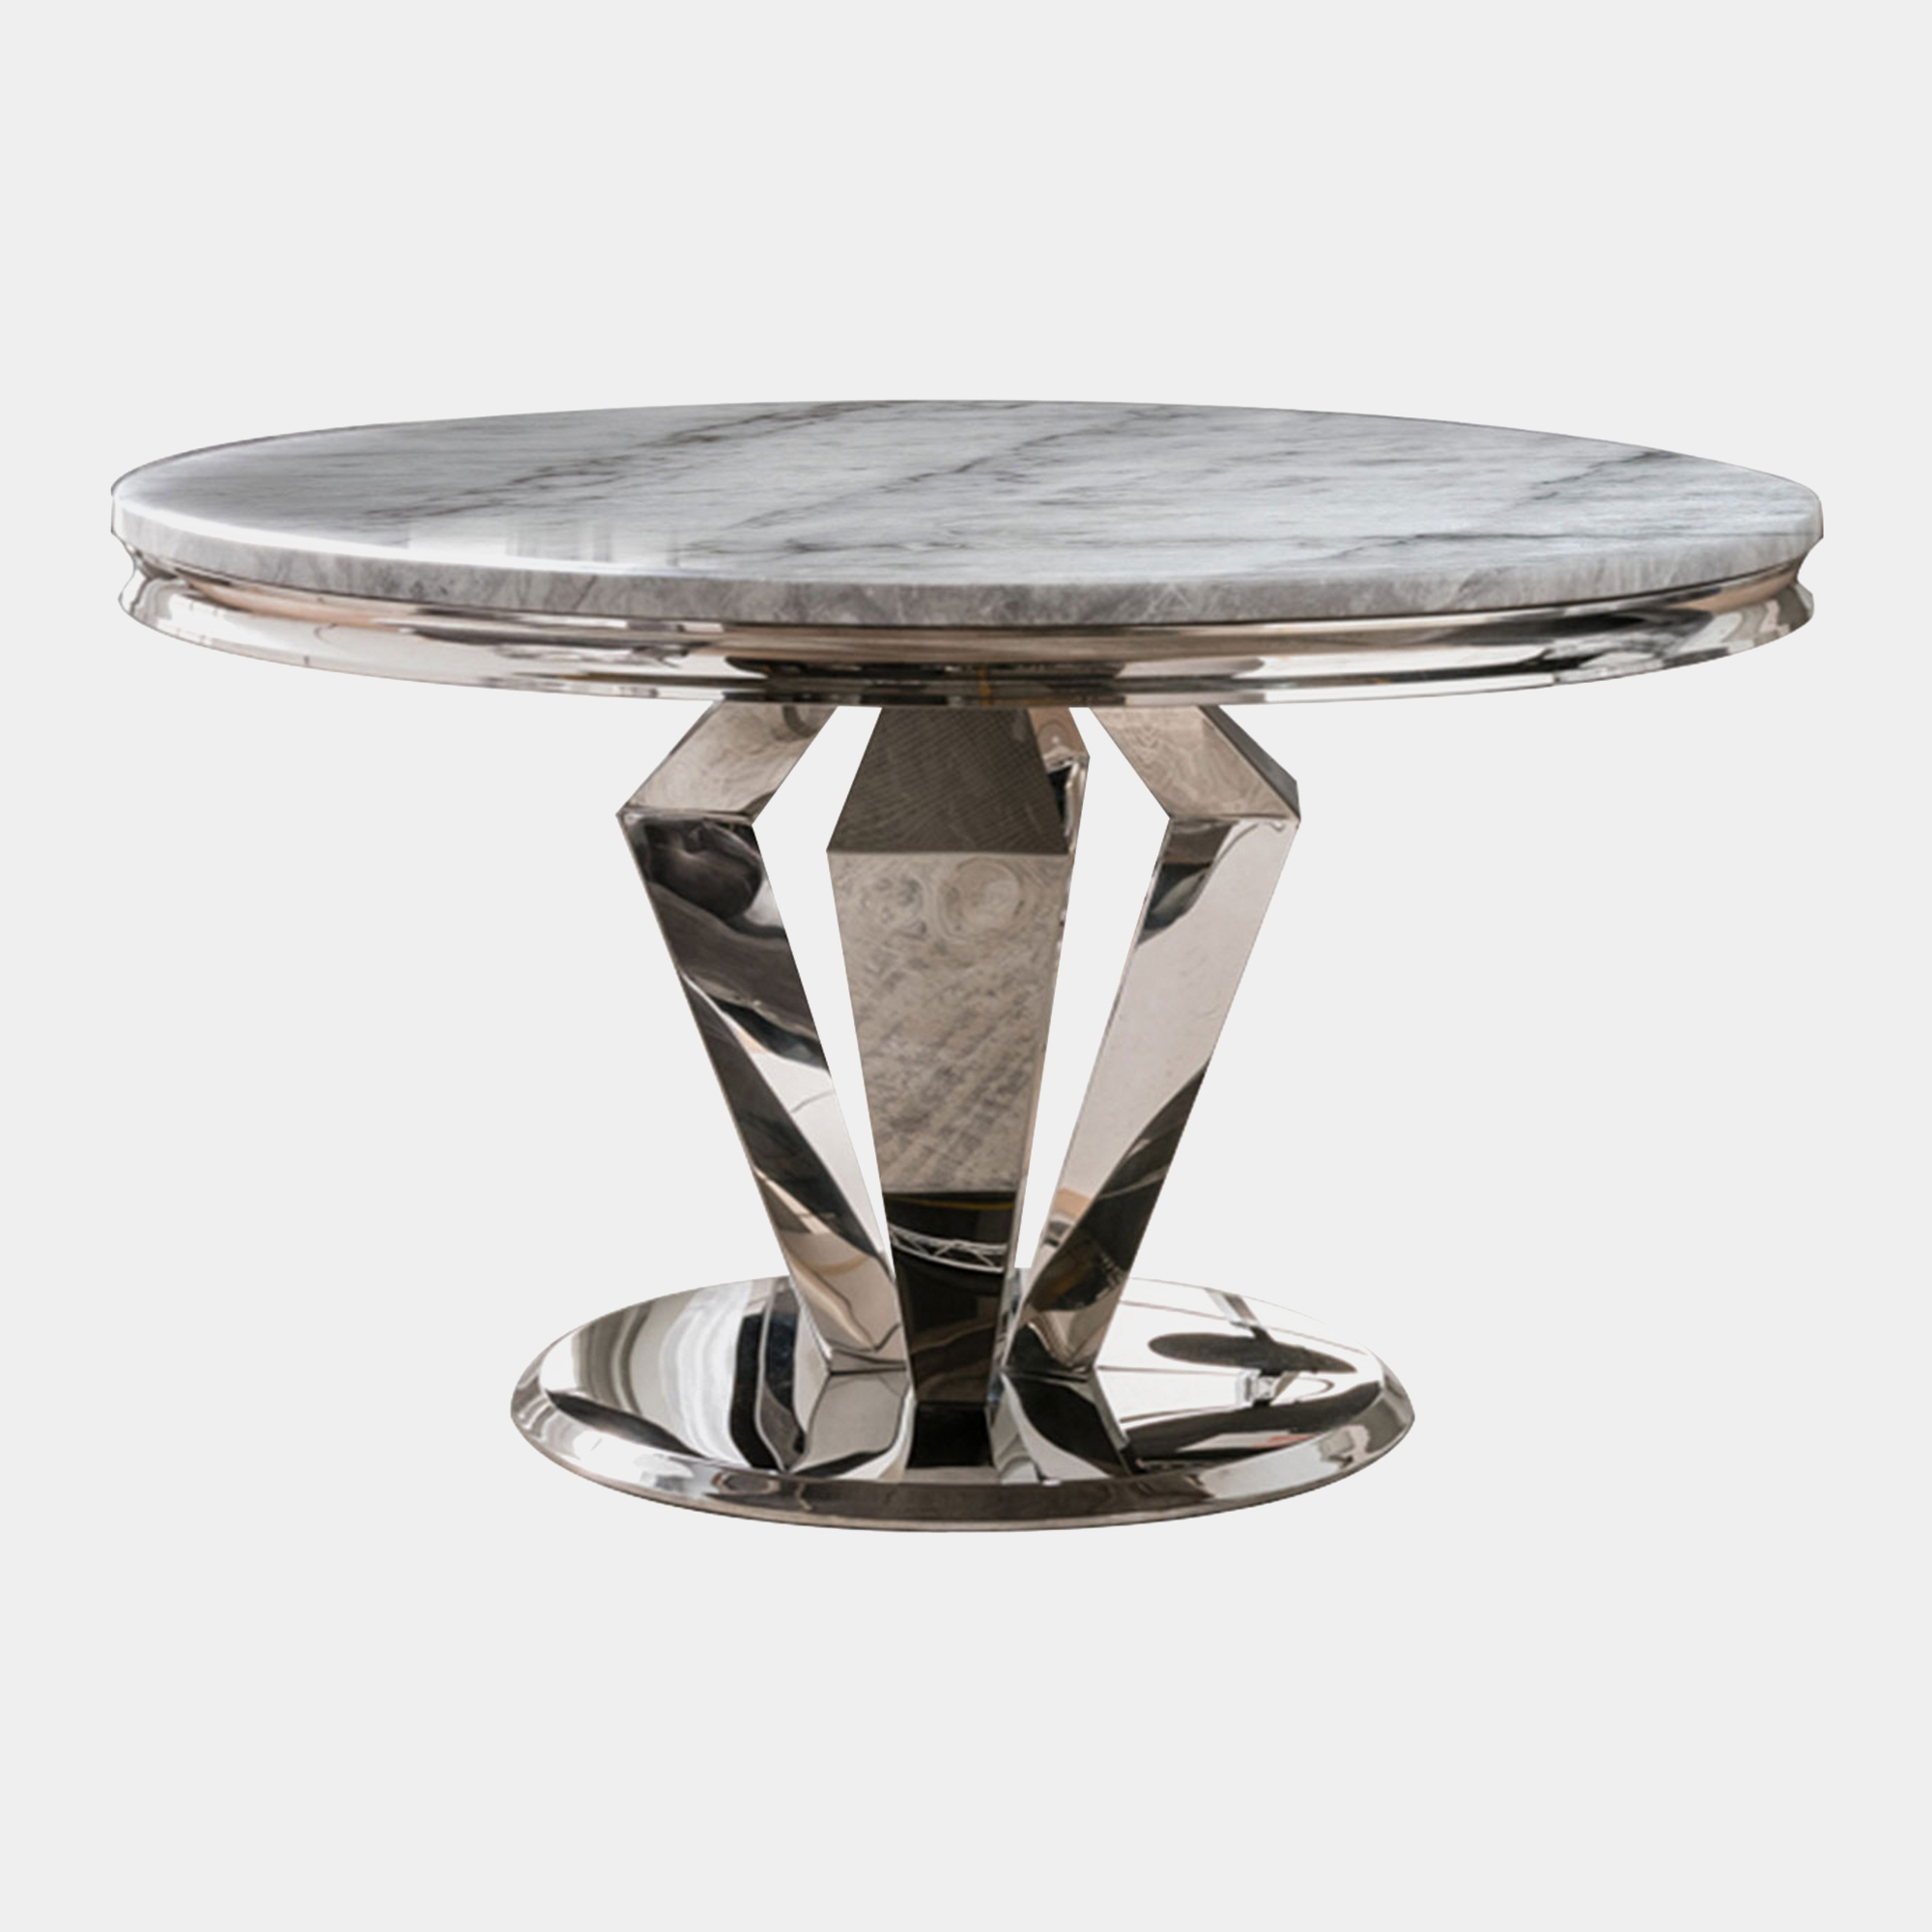 Missano - 130cm Circular Dining Table Grey Marble Top - Dining Tables ...